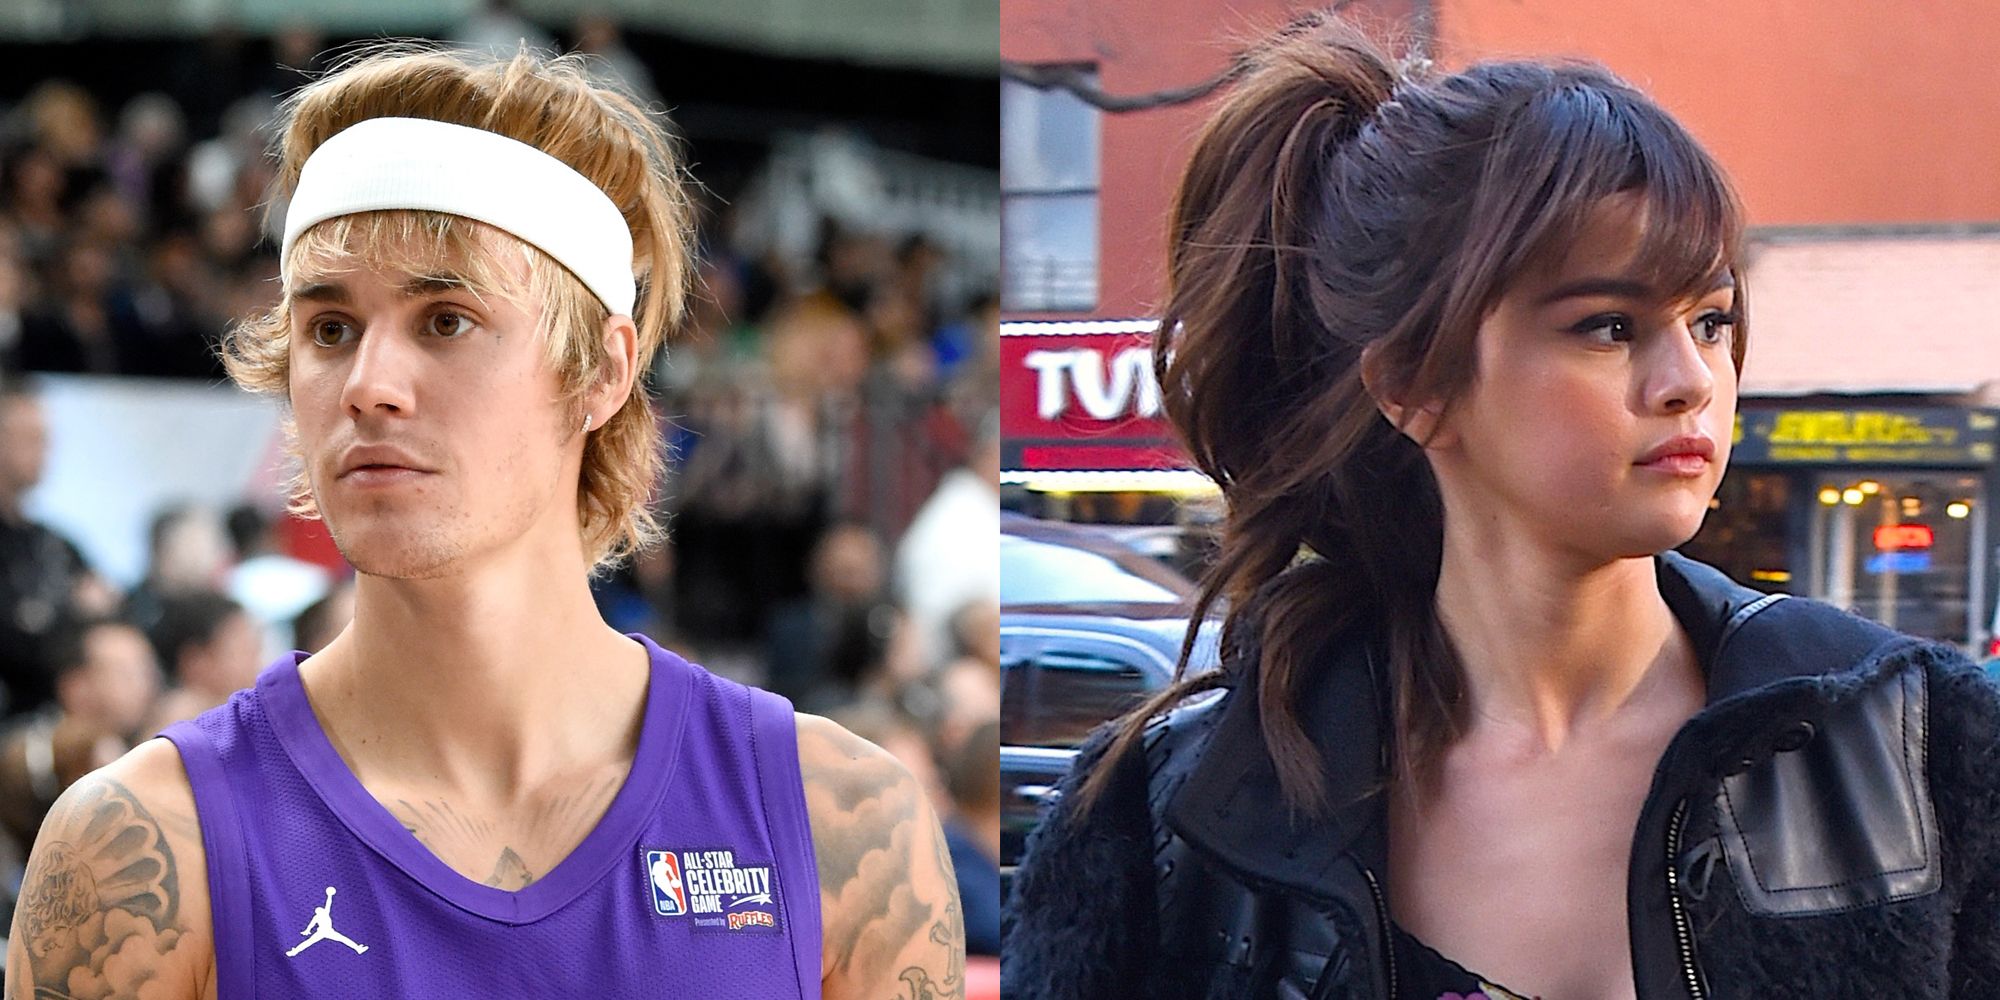 Pulling Off The Best Of Justin Bieber Hairstyles Is Not That Difficult   StarBizcom